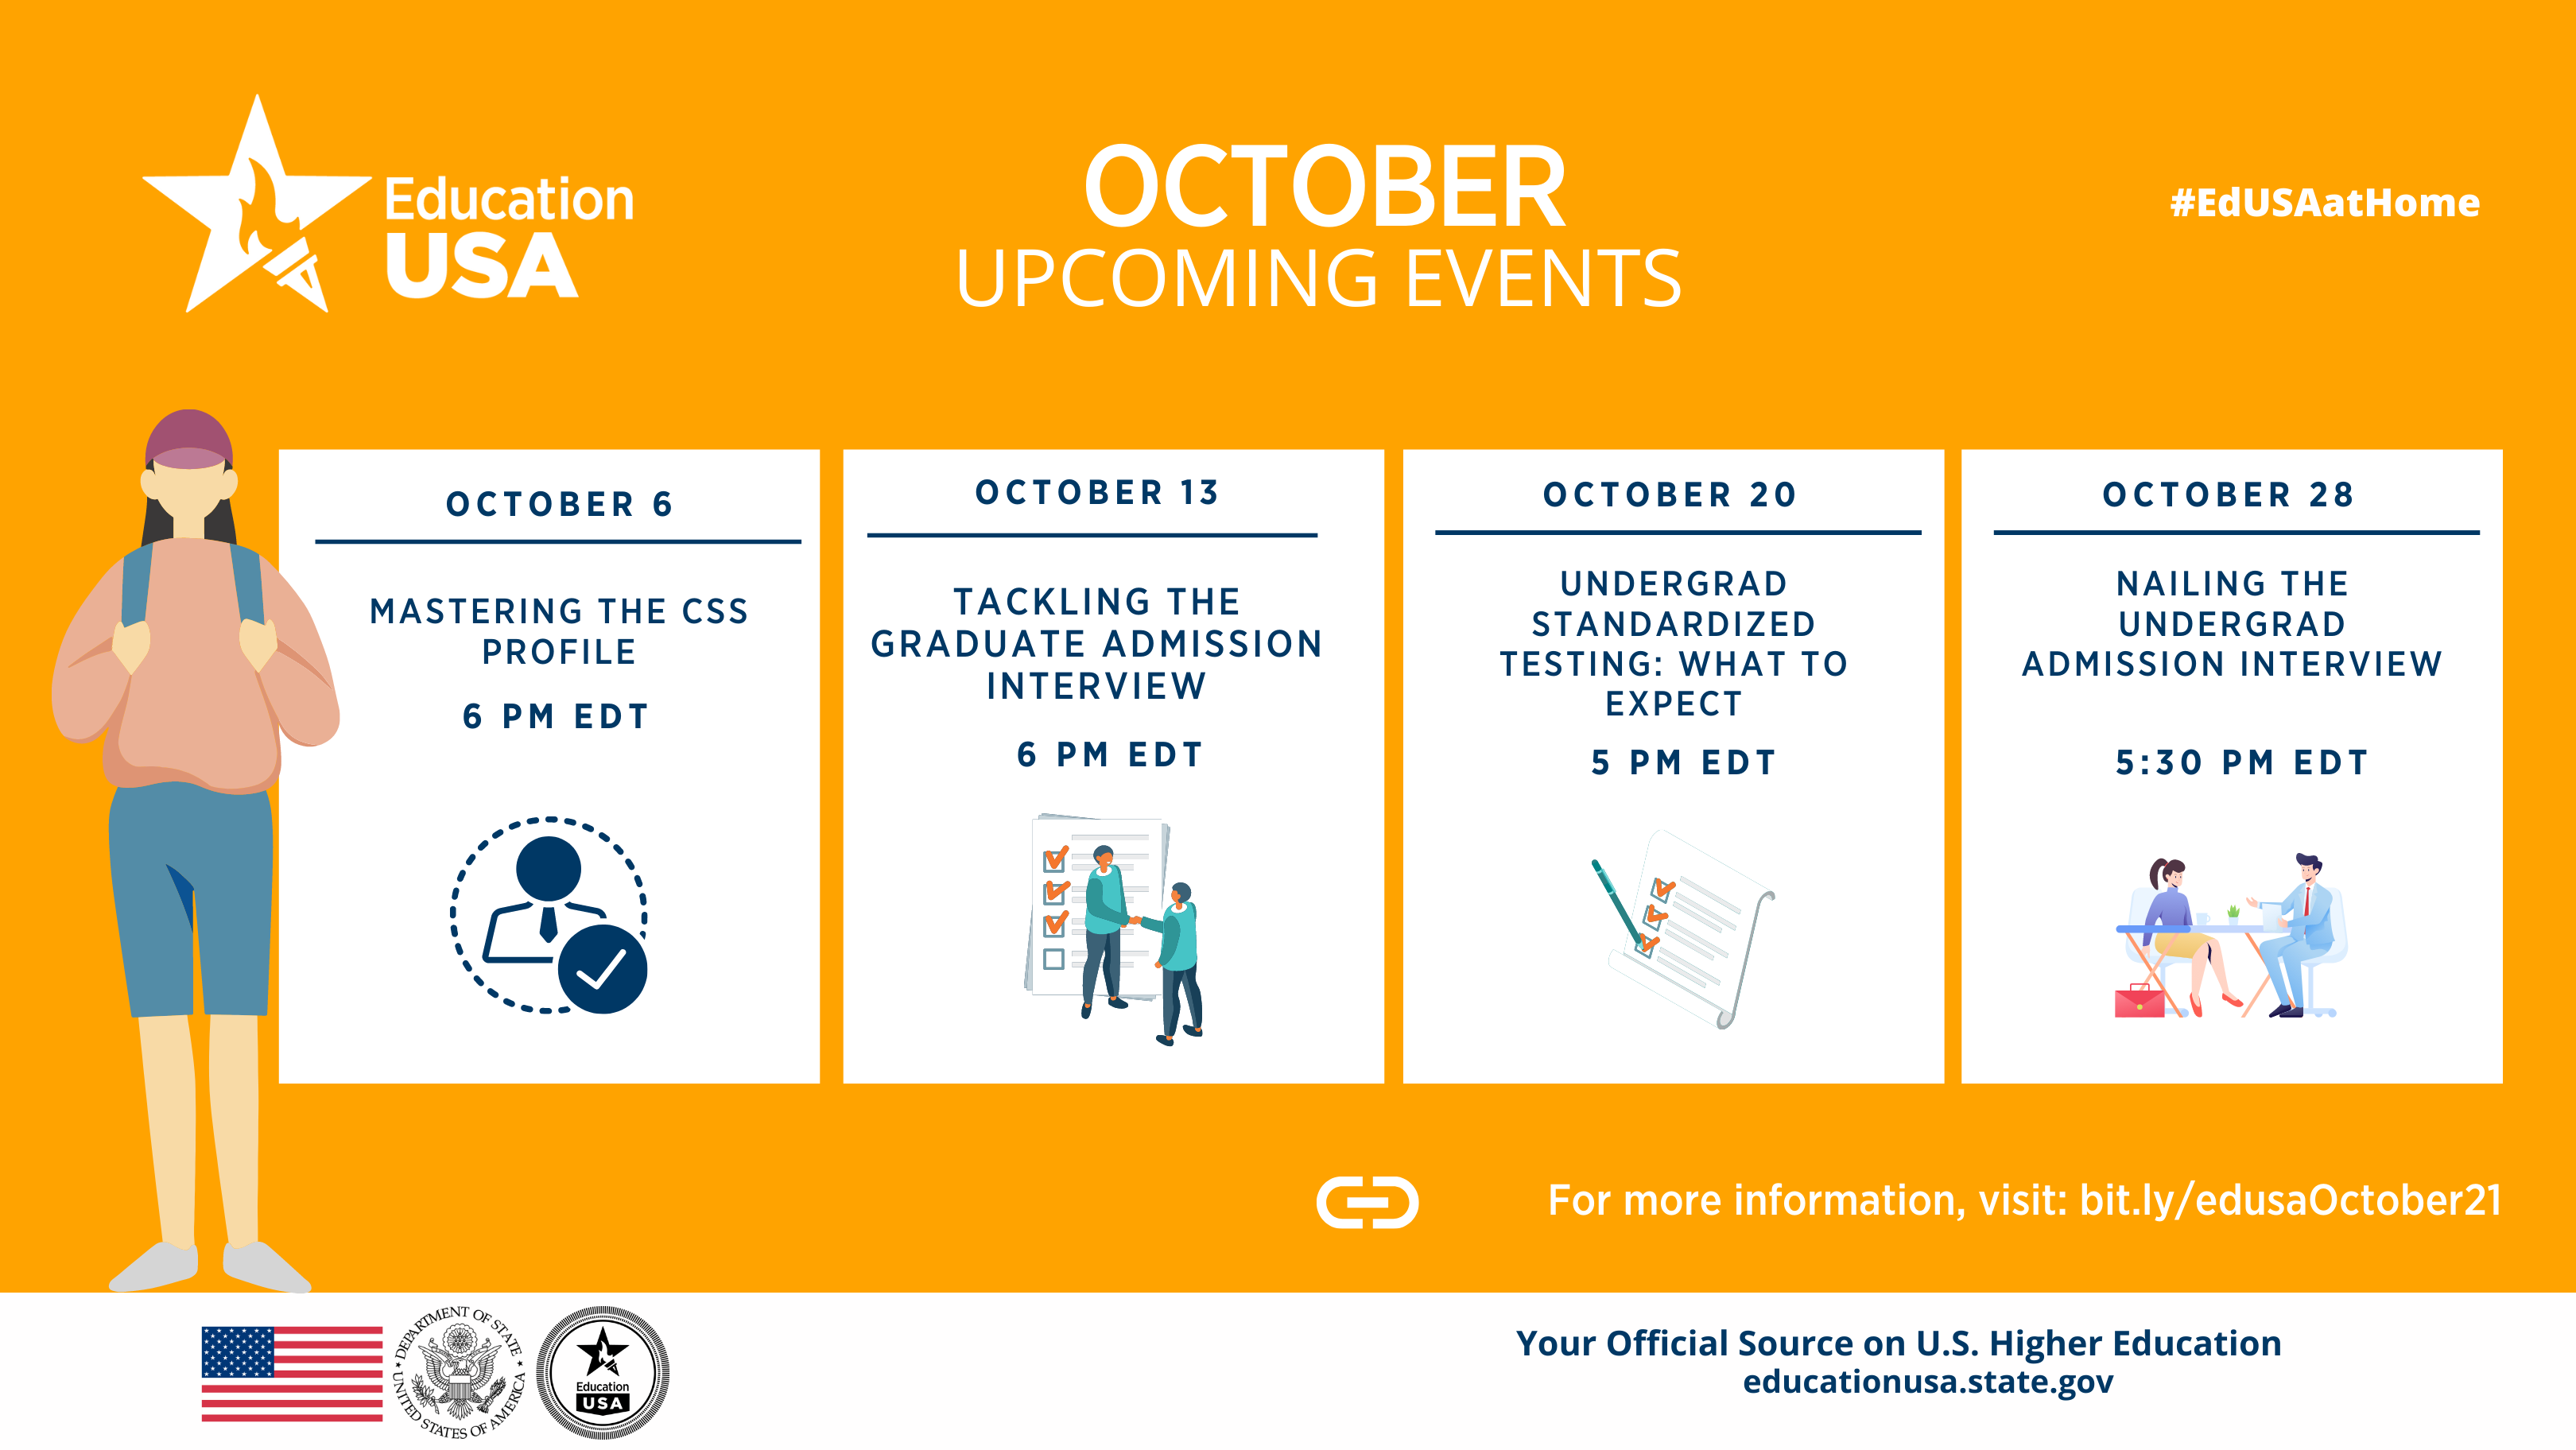 Calendar with upcoming events at EducationUSA. All information available in "Events" on our website.